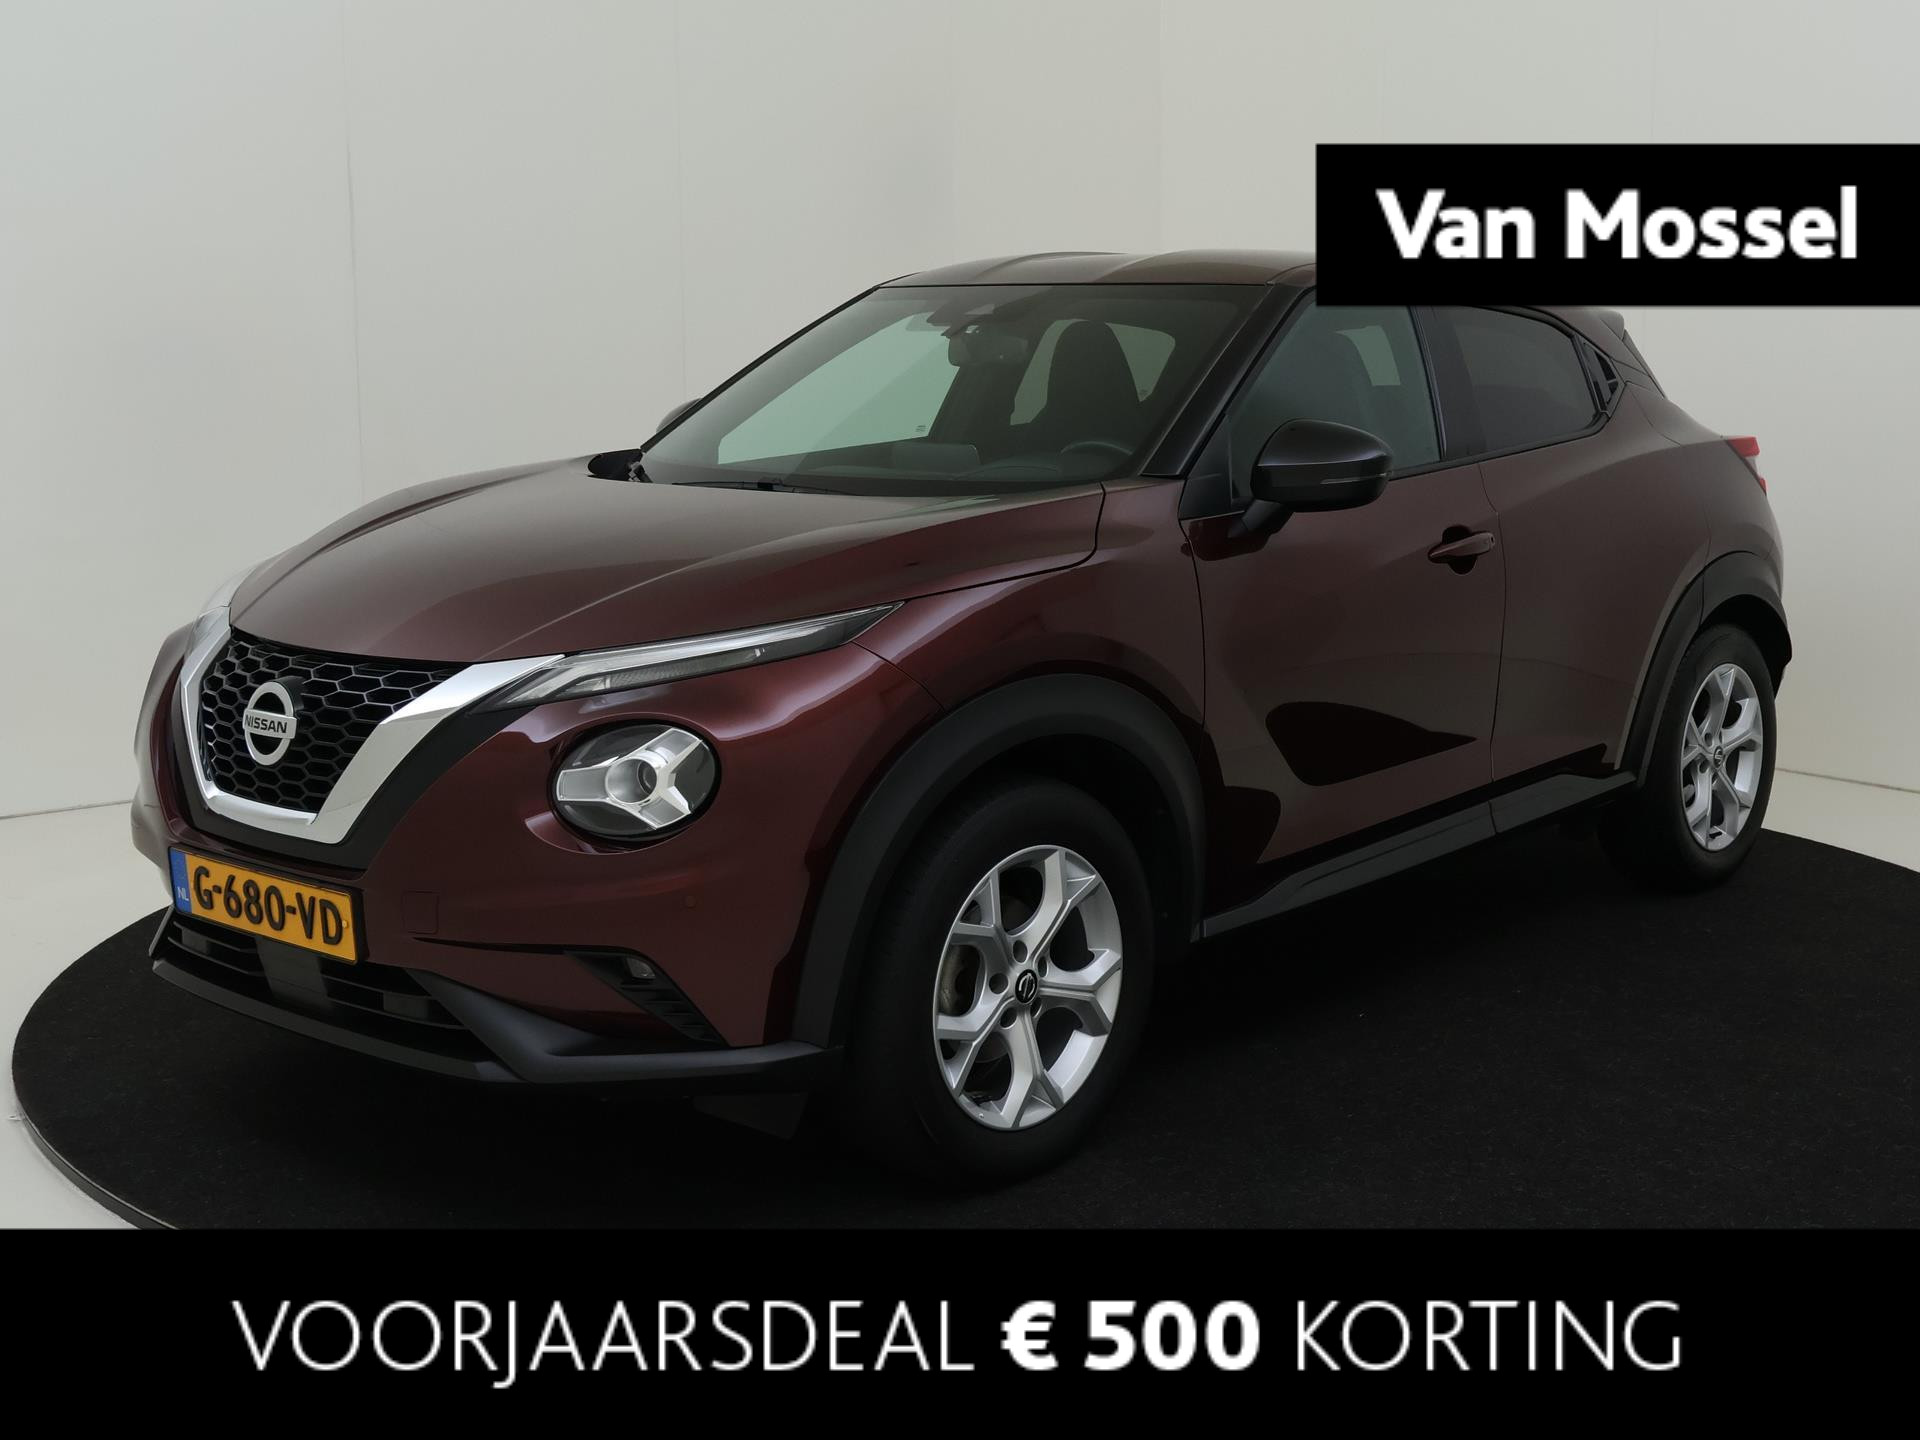 Nissan Juke 1.0 DIG-T N-Connecta | Trekhaak | Camera | Full-Map Navigatie | Climate Control | 17" LMV | Privacy Glass | Apple Carplay & Android Auto